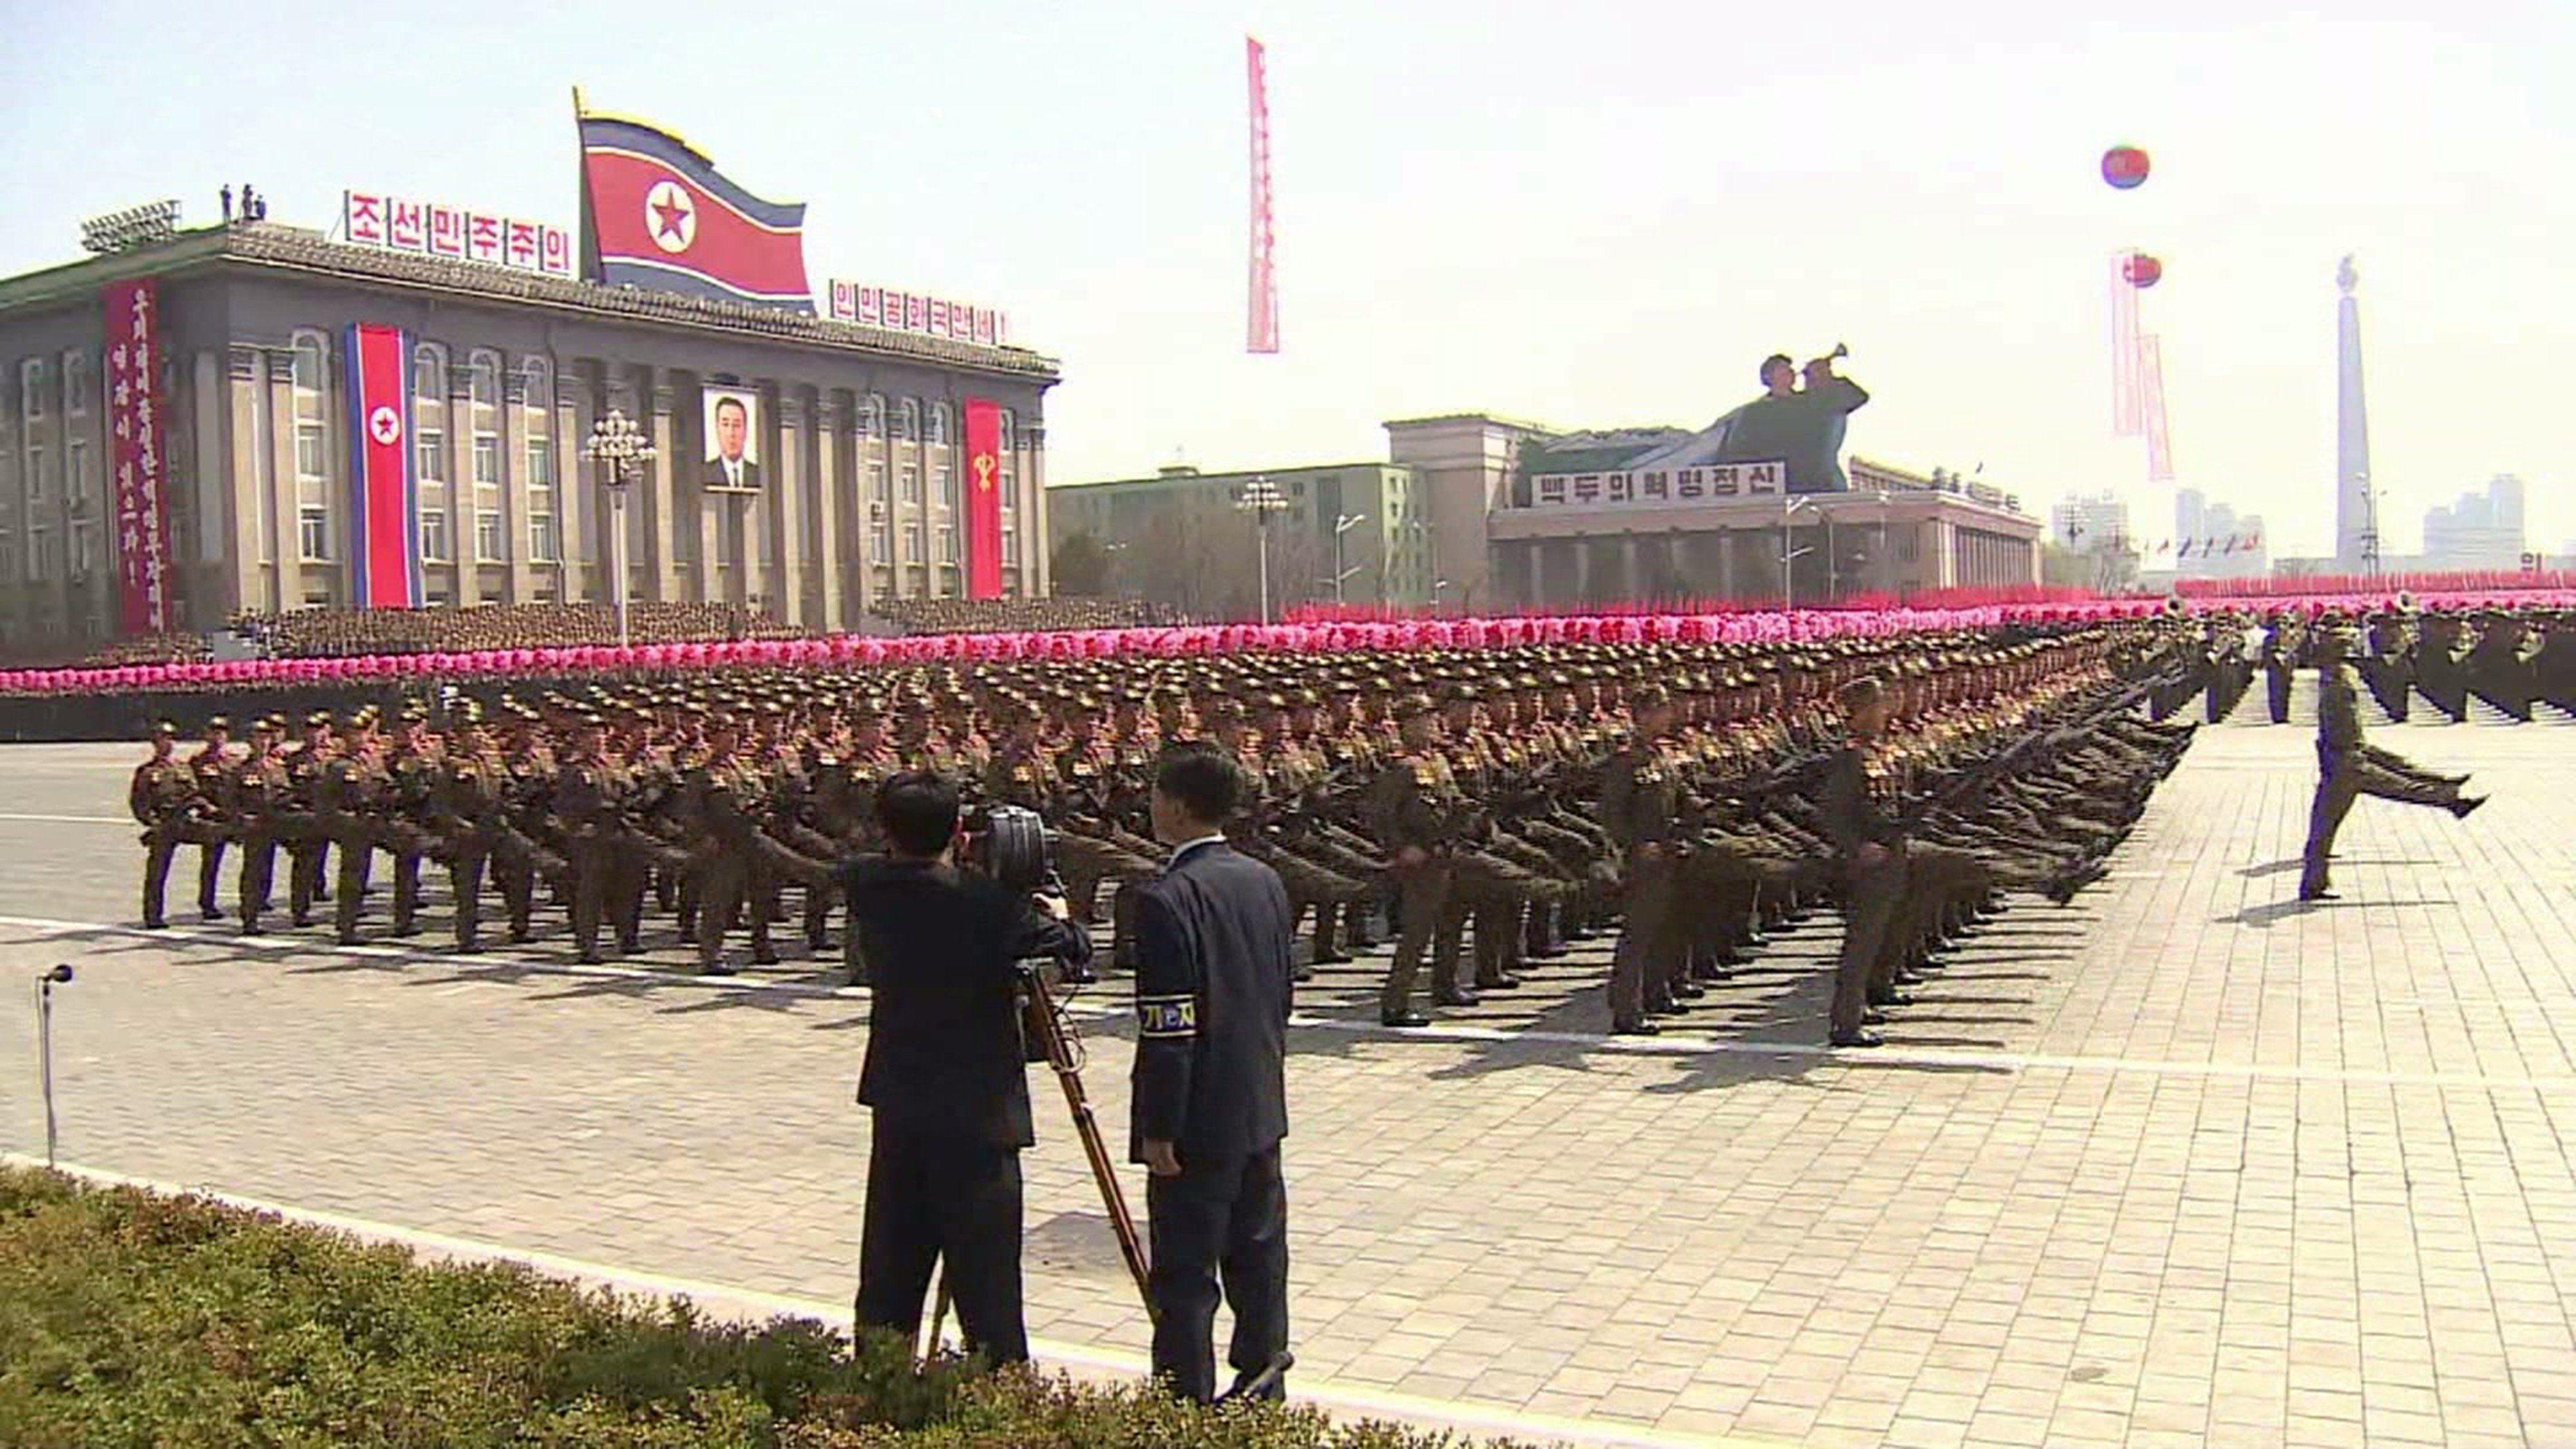 Missile North Korea Vehicle Truck Military Parade Wepons 3